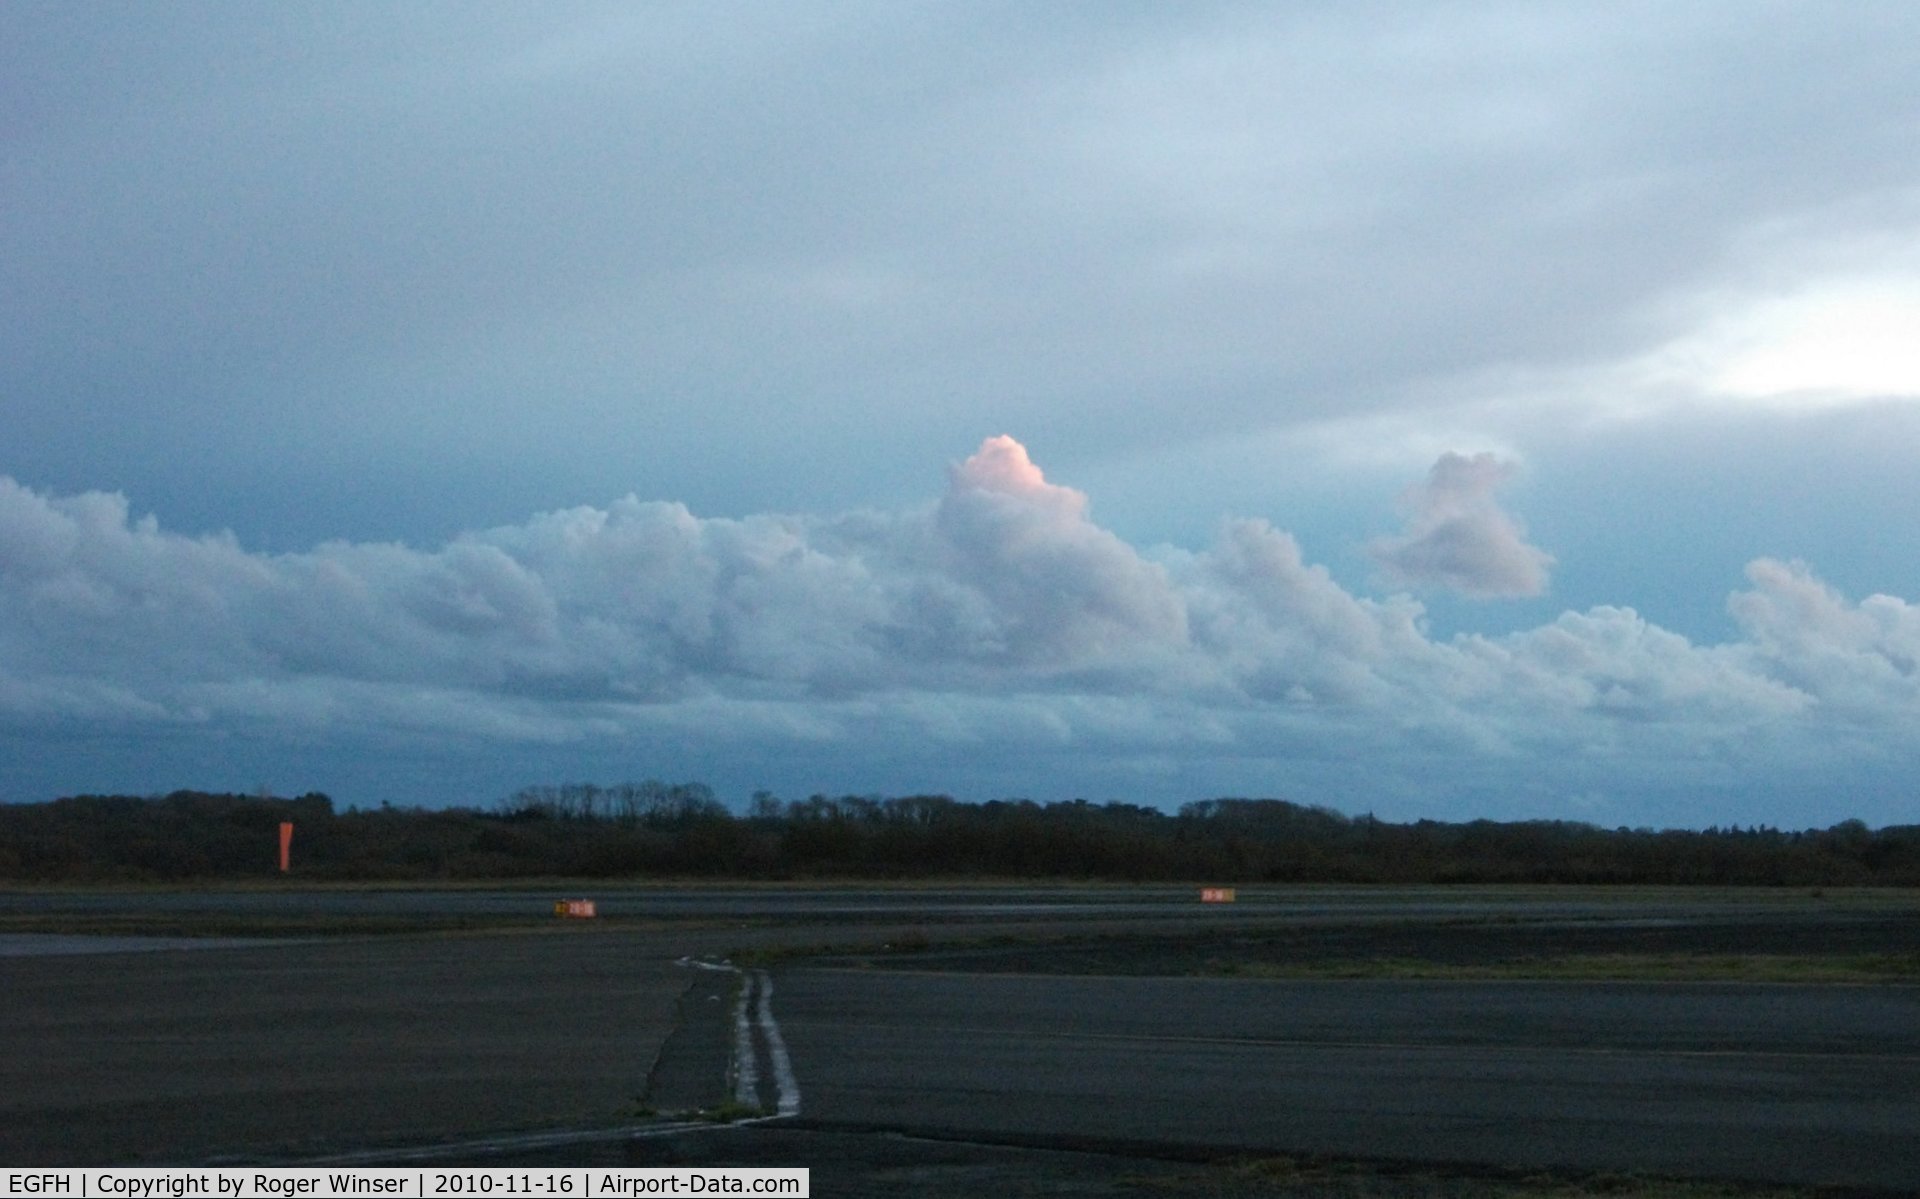 Swansea Airport, Swansea, Wales United Kingdom (EGFH) - The calm before the storm. Looking to the south west